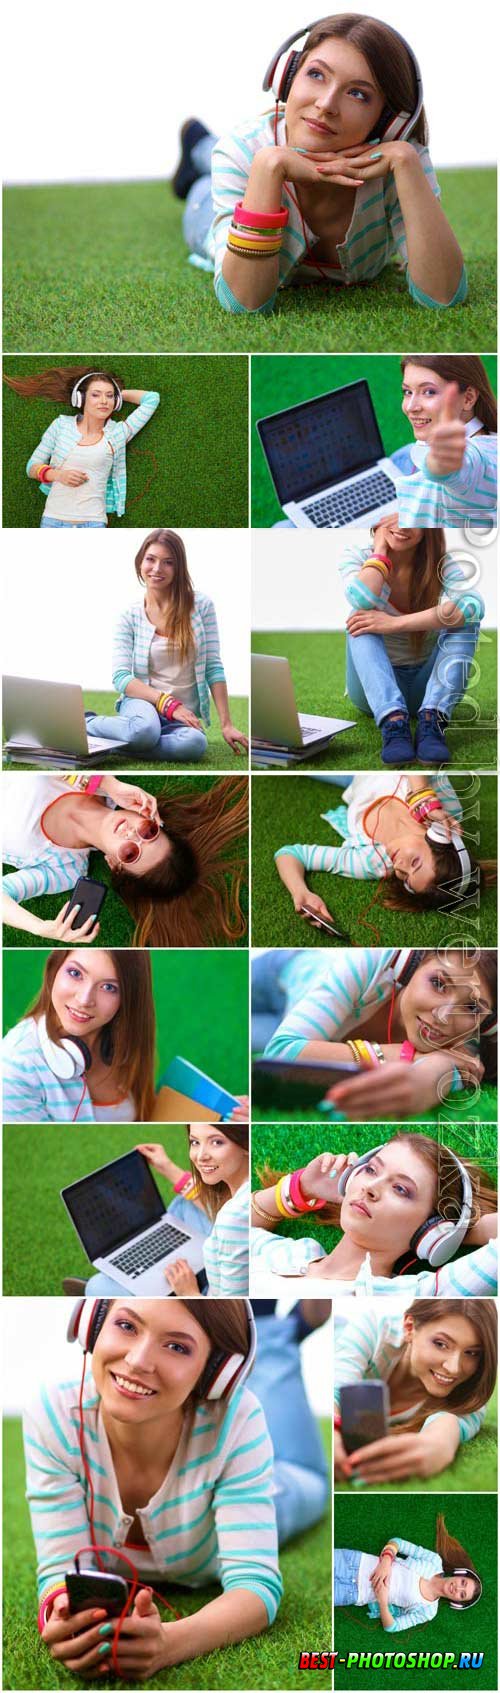 Girl with gadgets on green grass stock photo